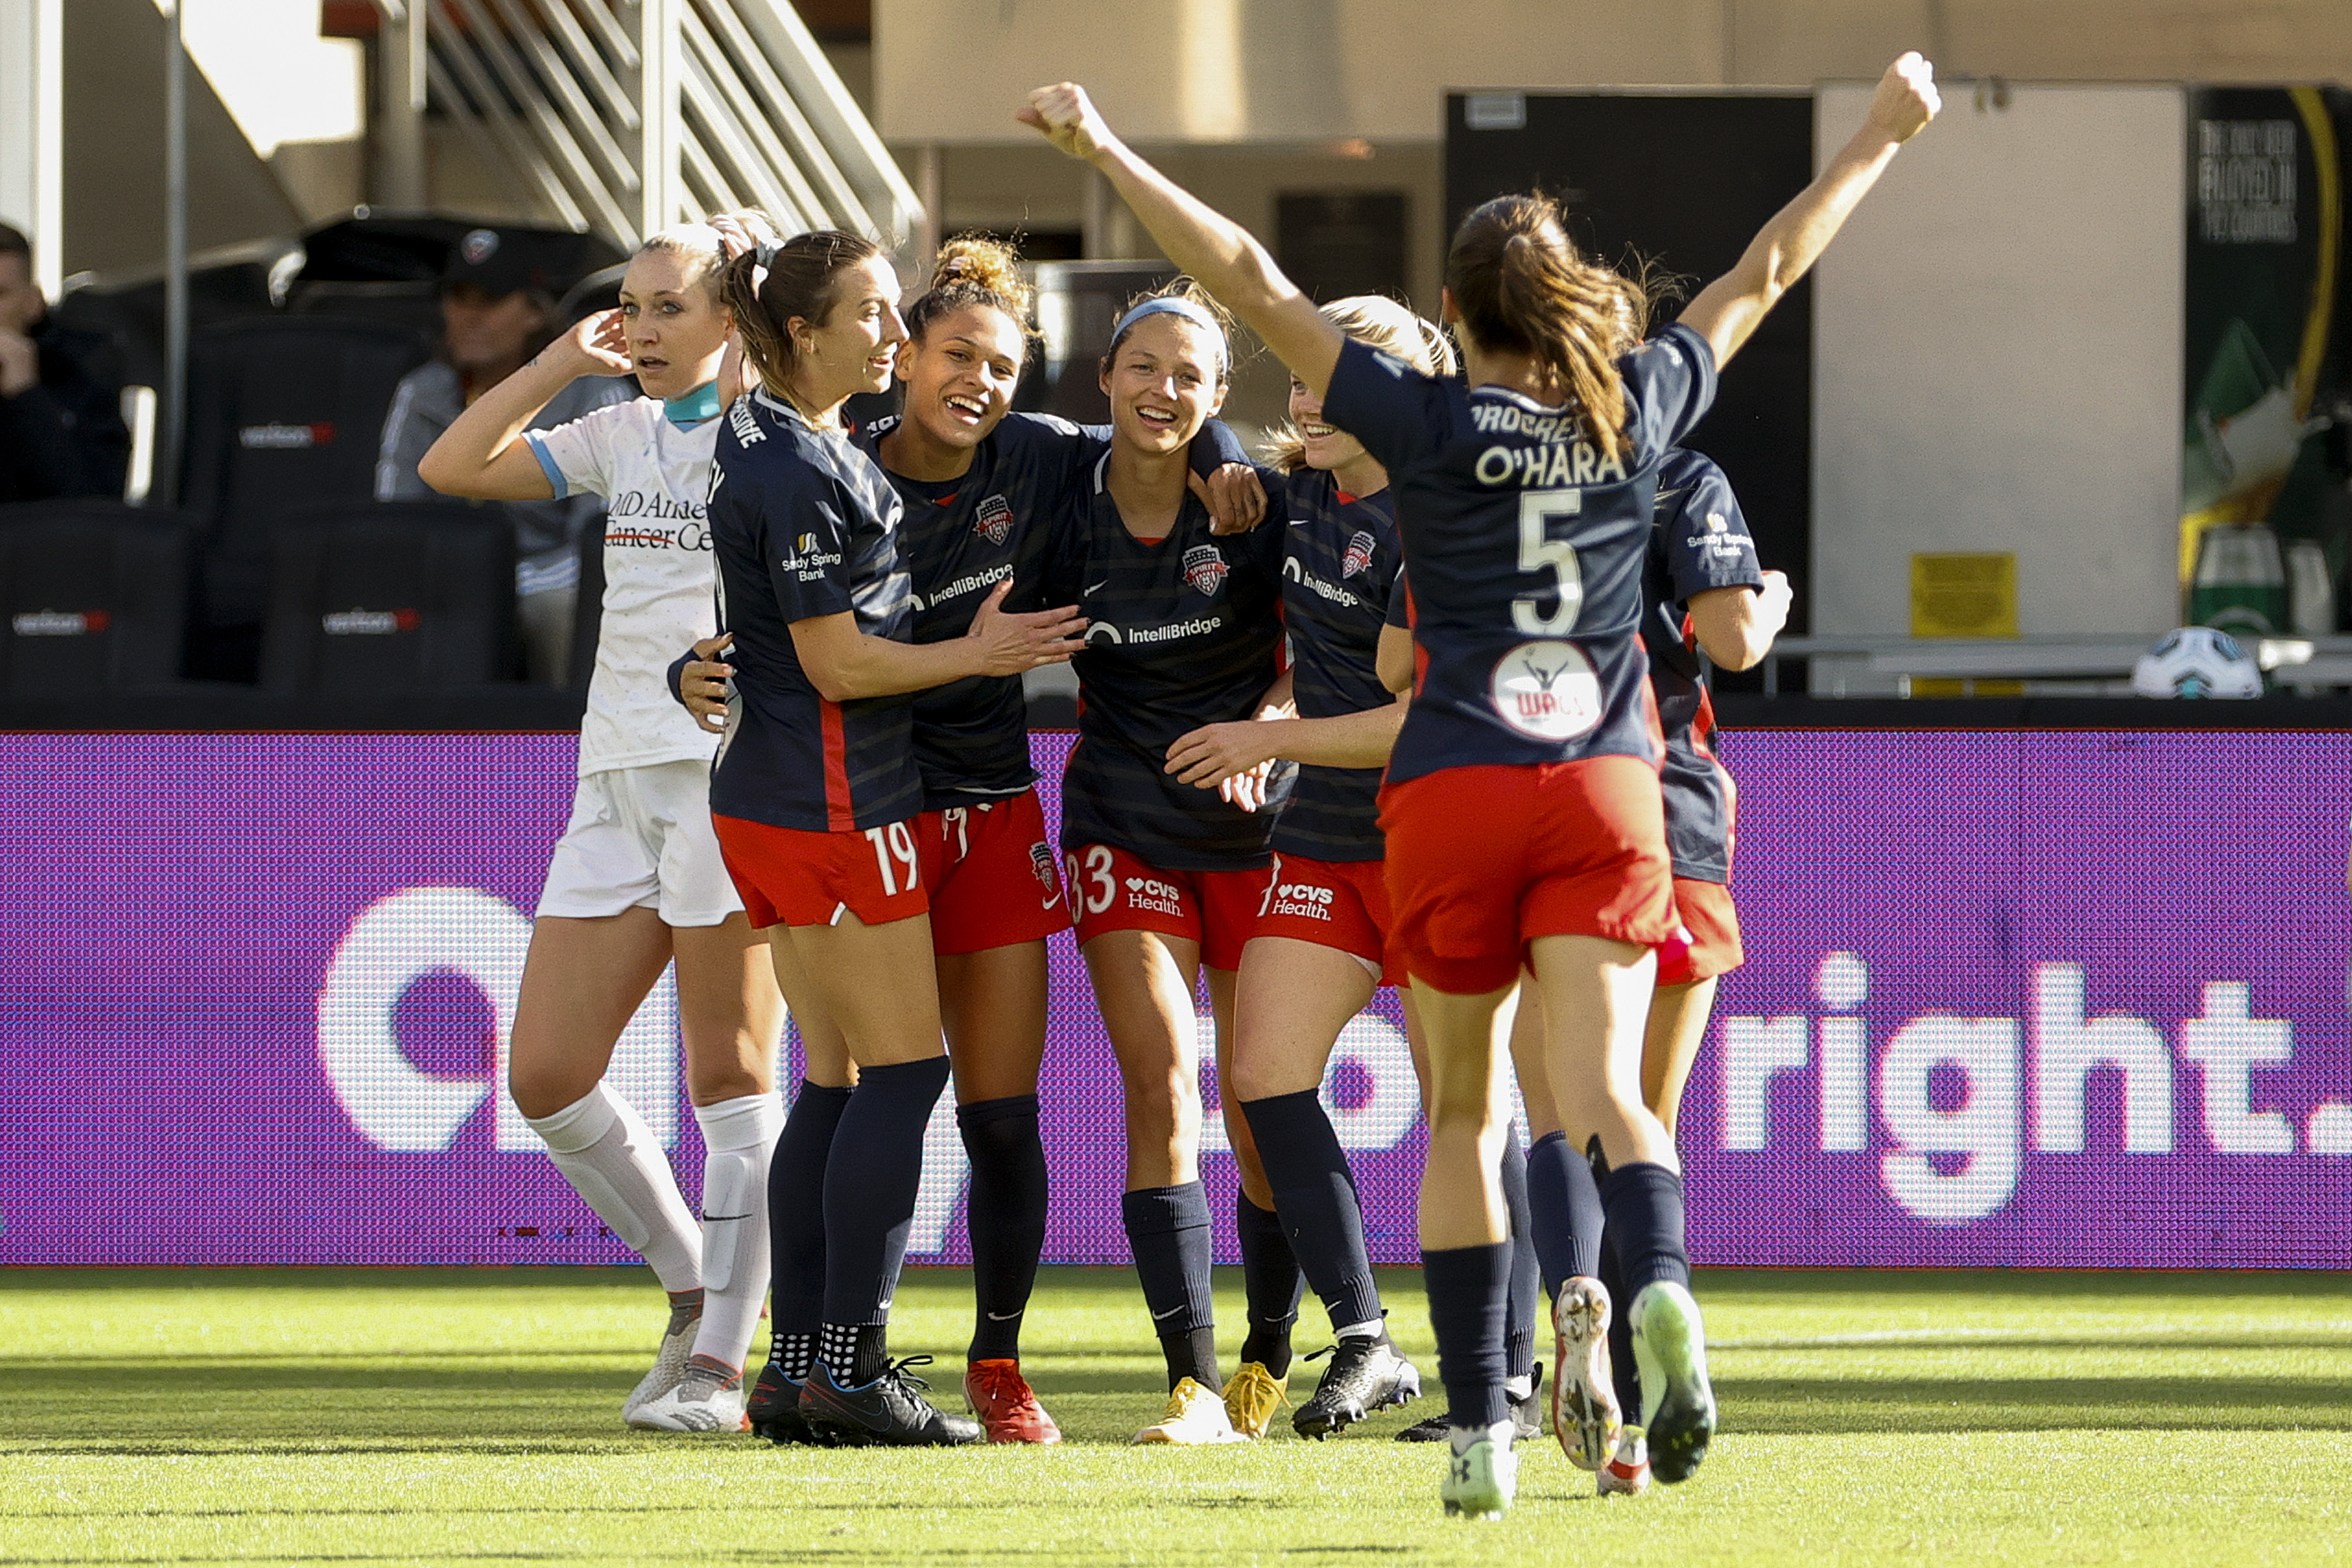 Washington Spirit players celebrate following a goal by Trinity Rodman #2 during the second half against the Houston Dash at Audi Field on October 31, 2021 in Washington, DC.